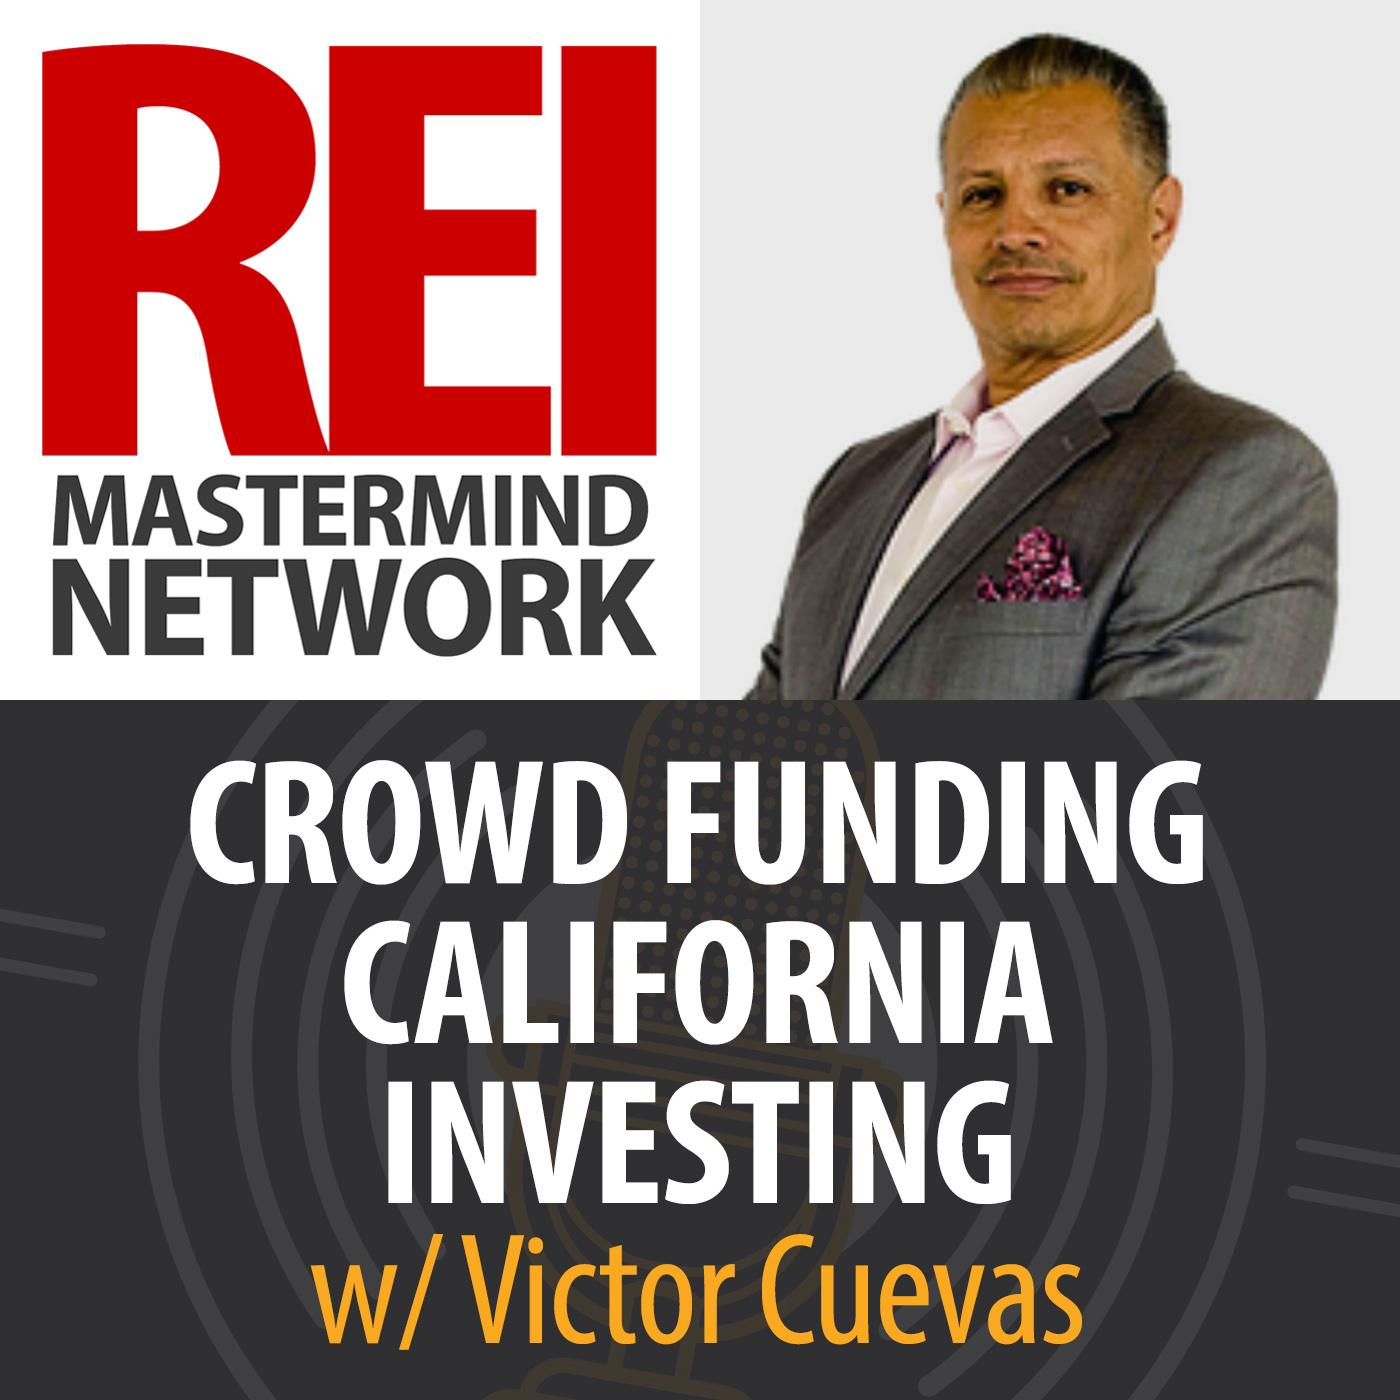 Crowd Funding California Investing with Victor Cuevas Image